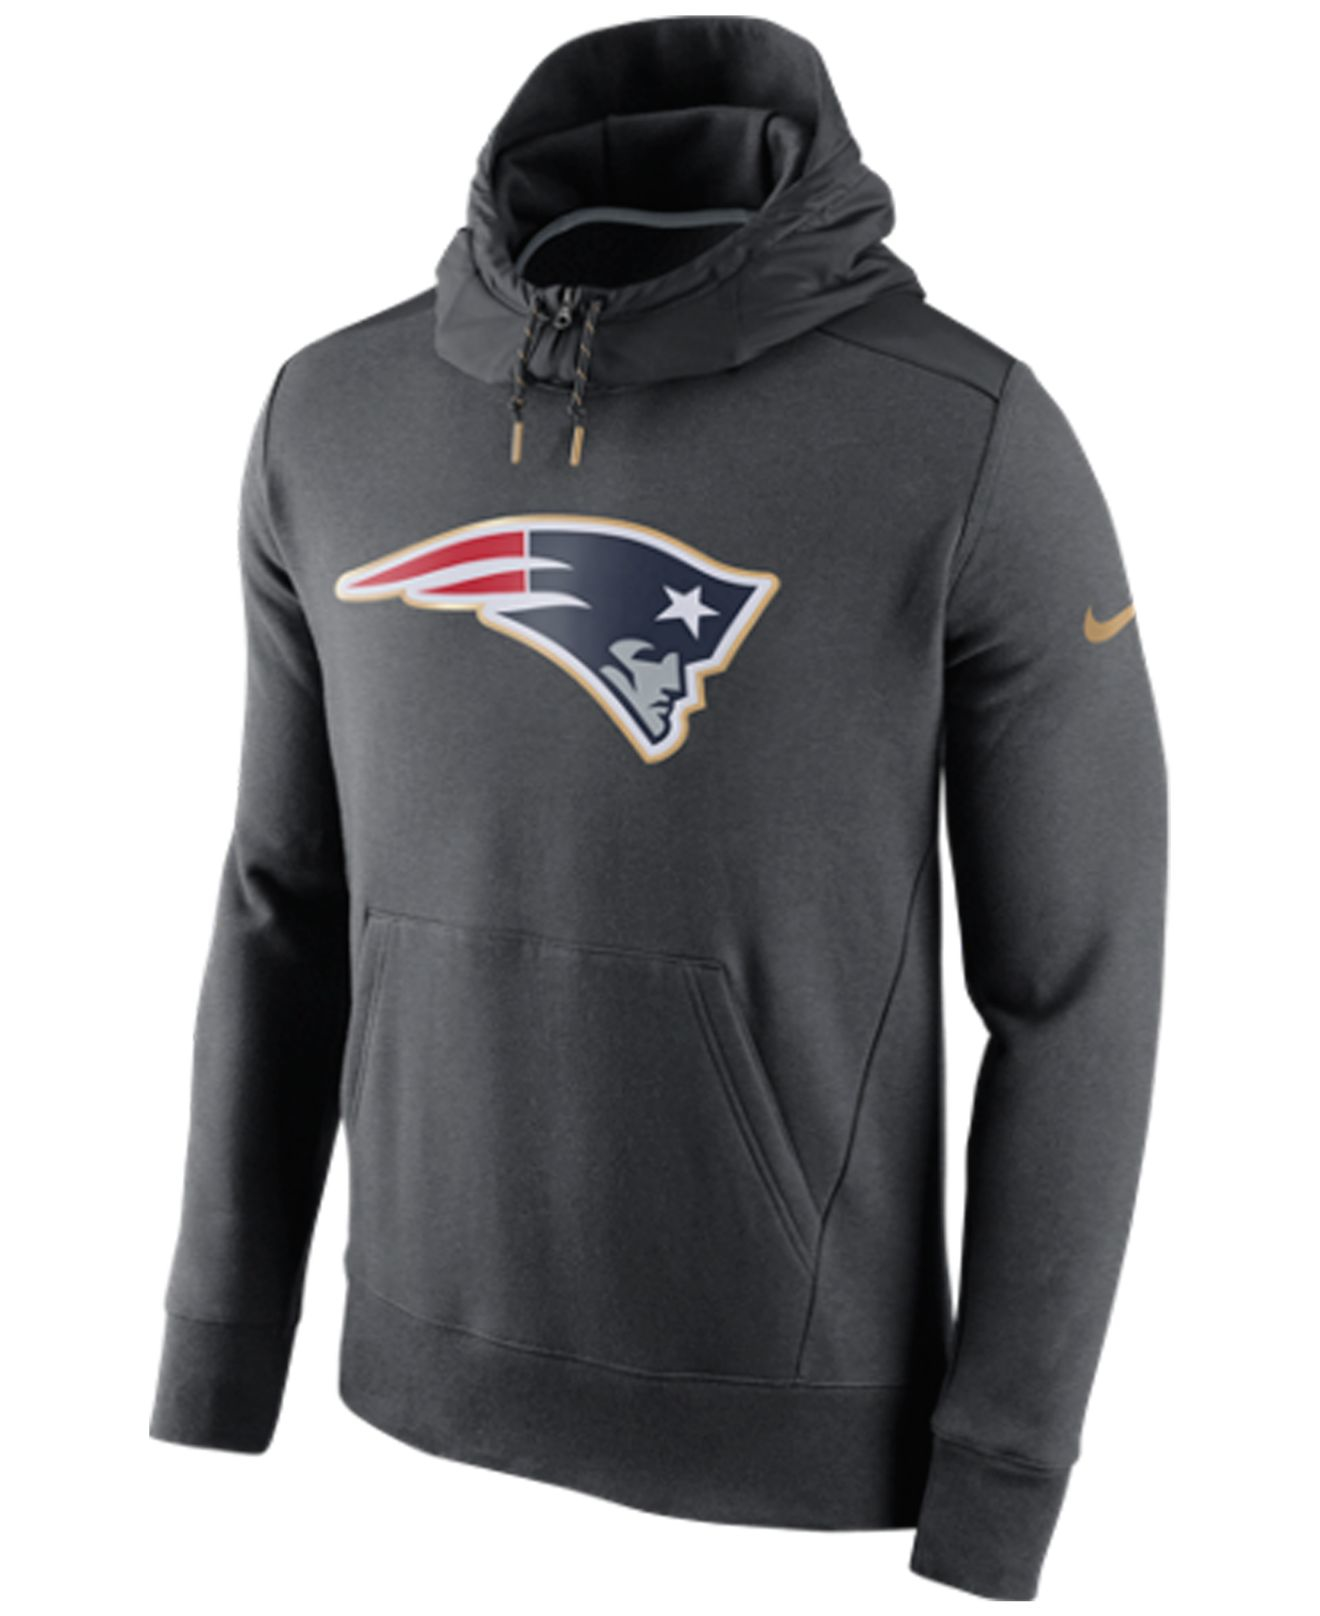 Lyst - Nike Men's New England Patriots Champ Drive Hybrid Hoodie in ...